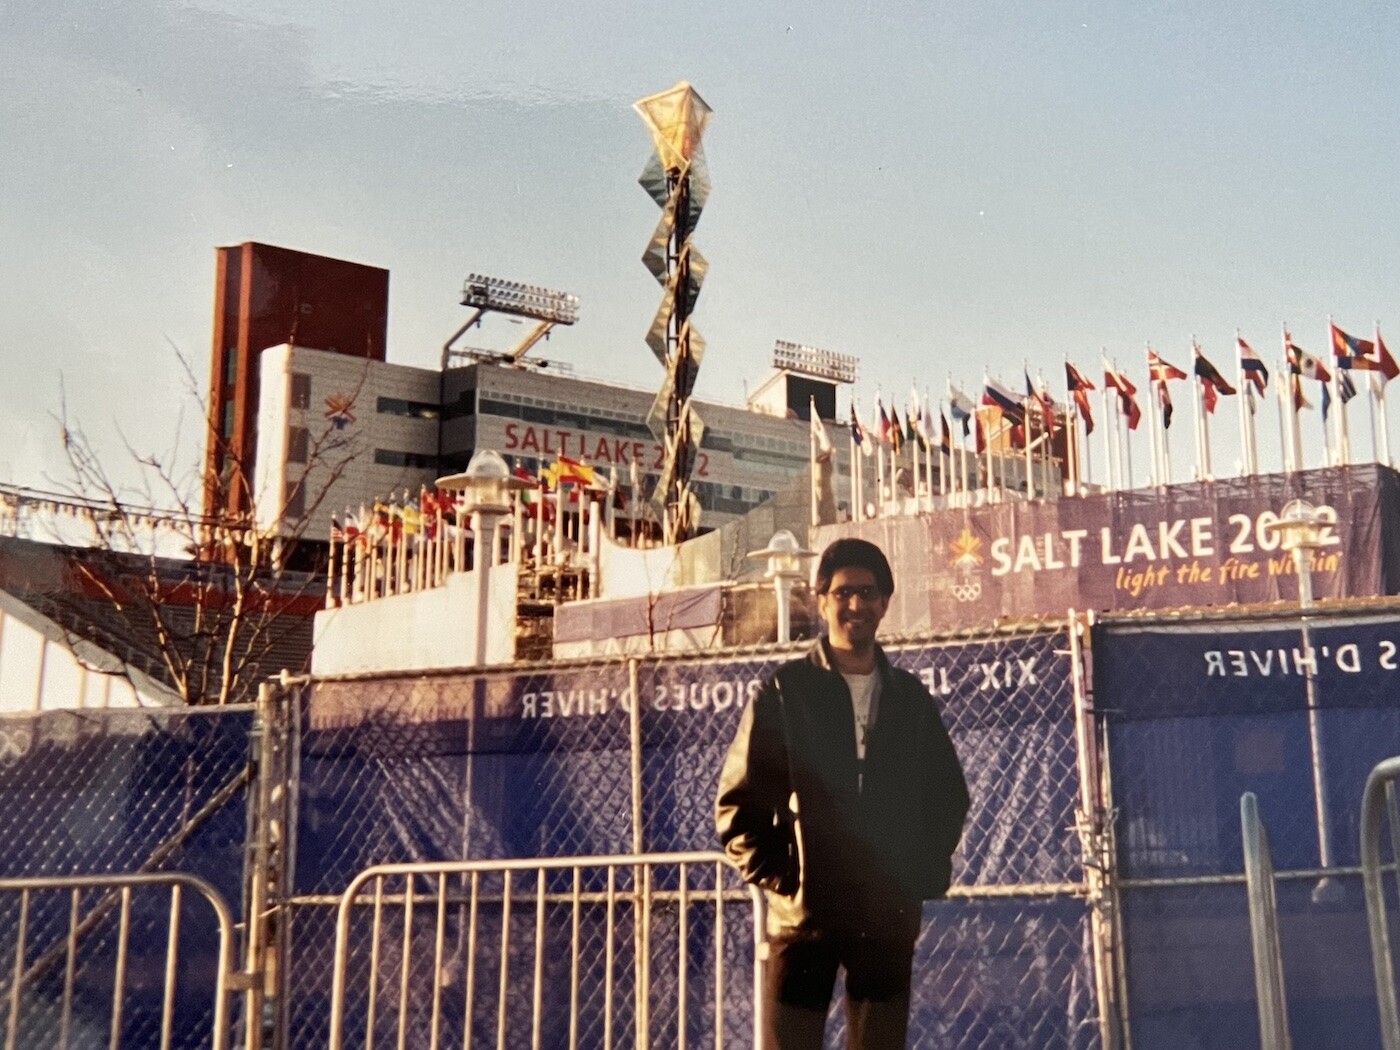 Omid Saadati poses in front of Rice Eccles Stadium as it is prepared for the 2002 Winter Olympics